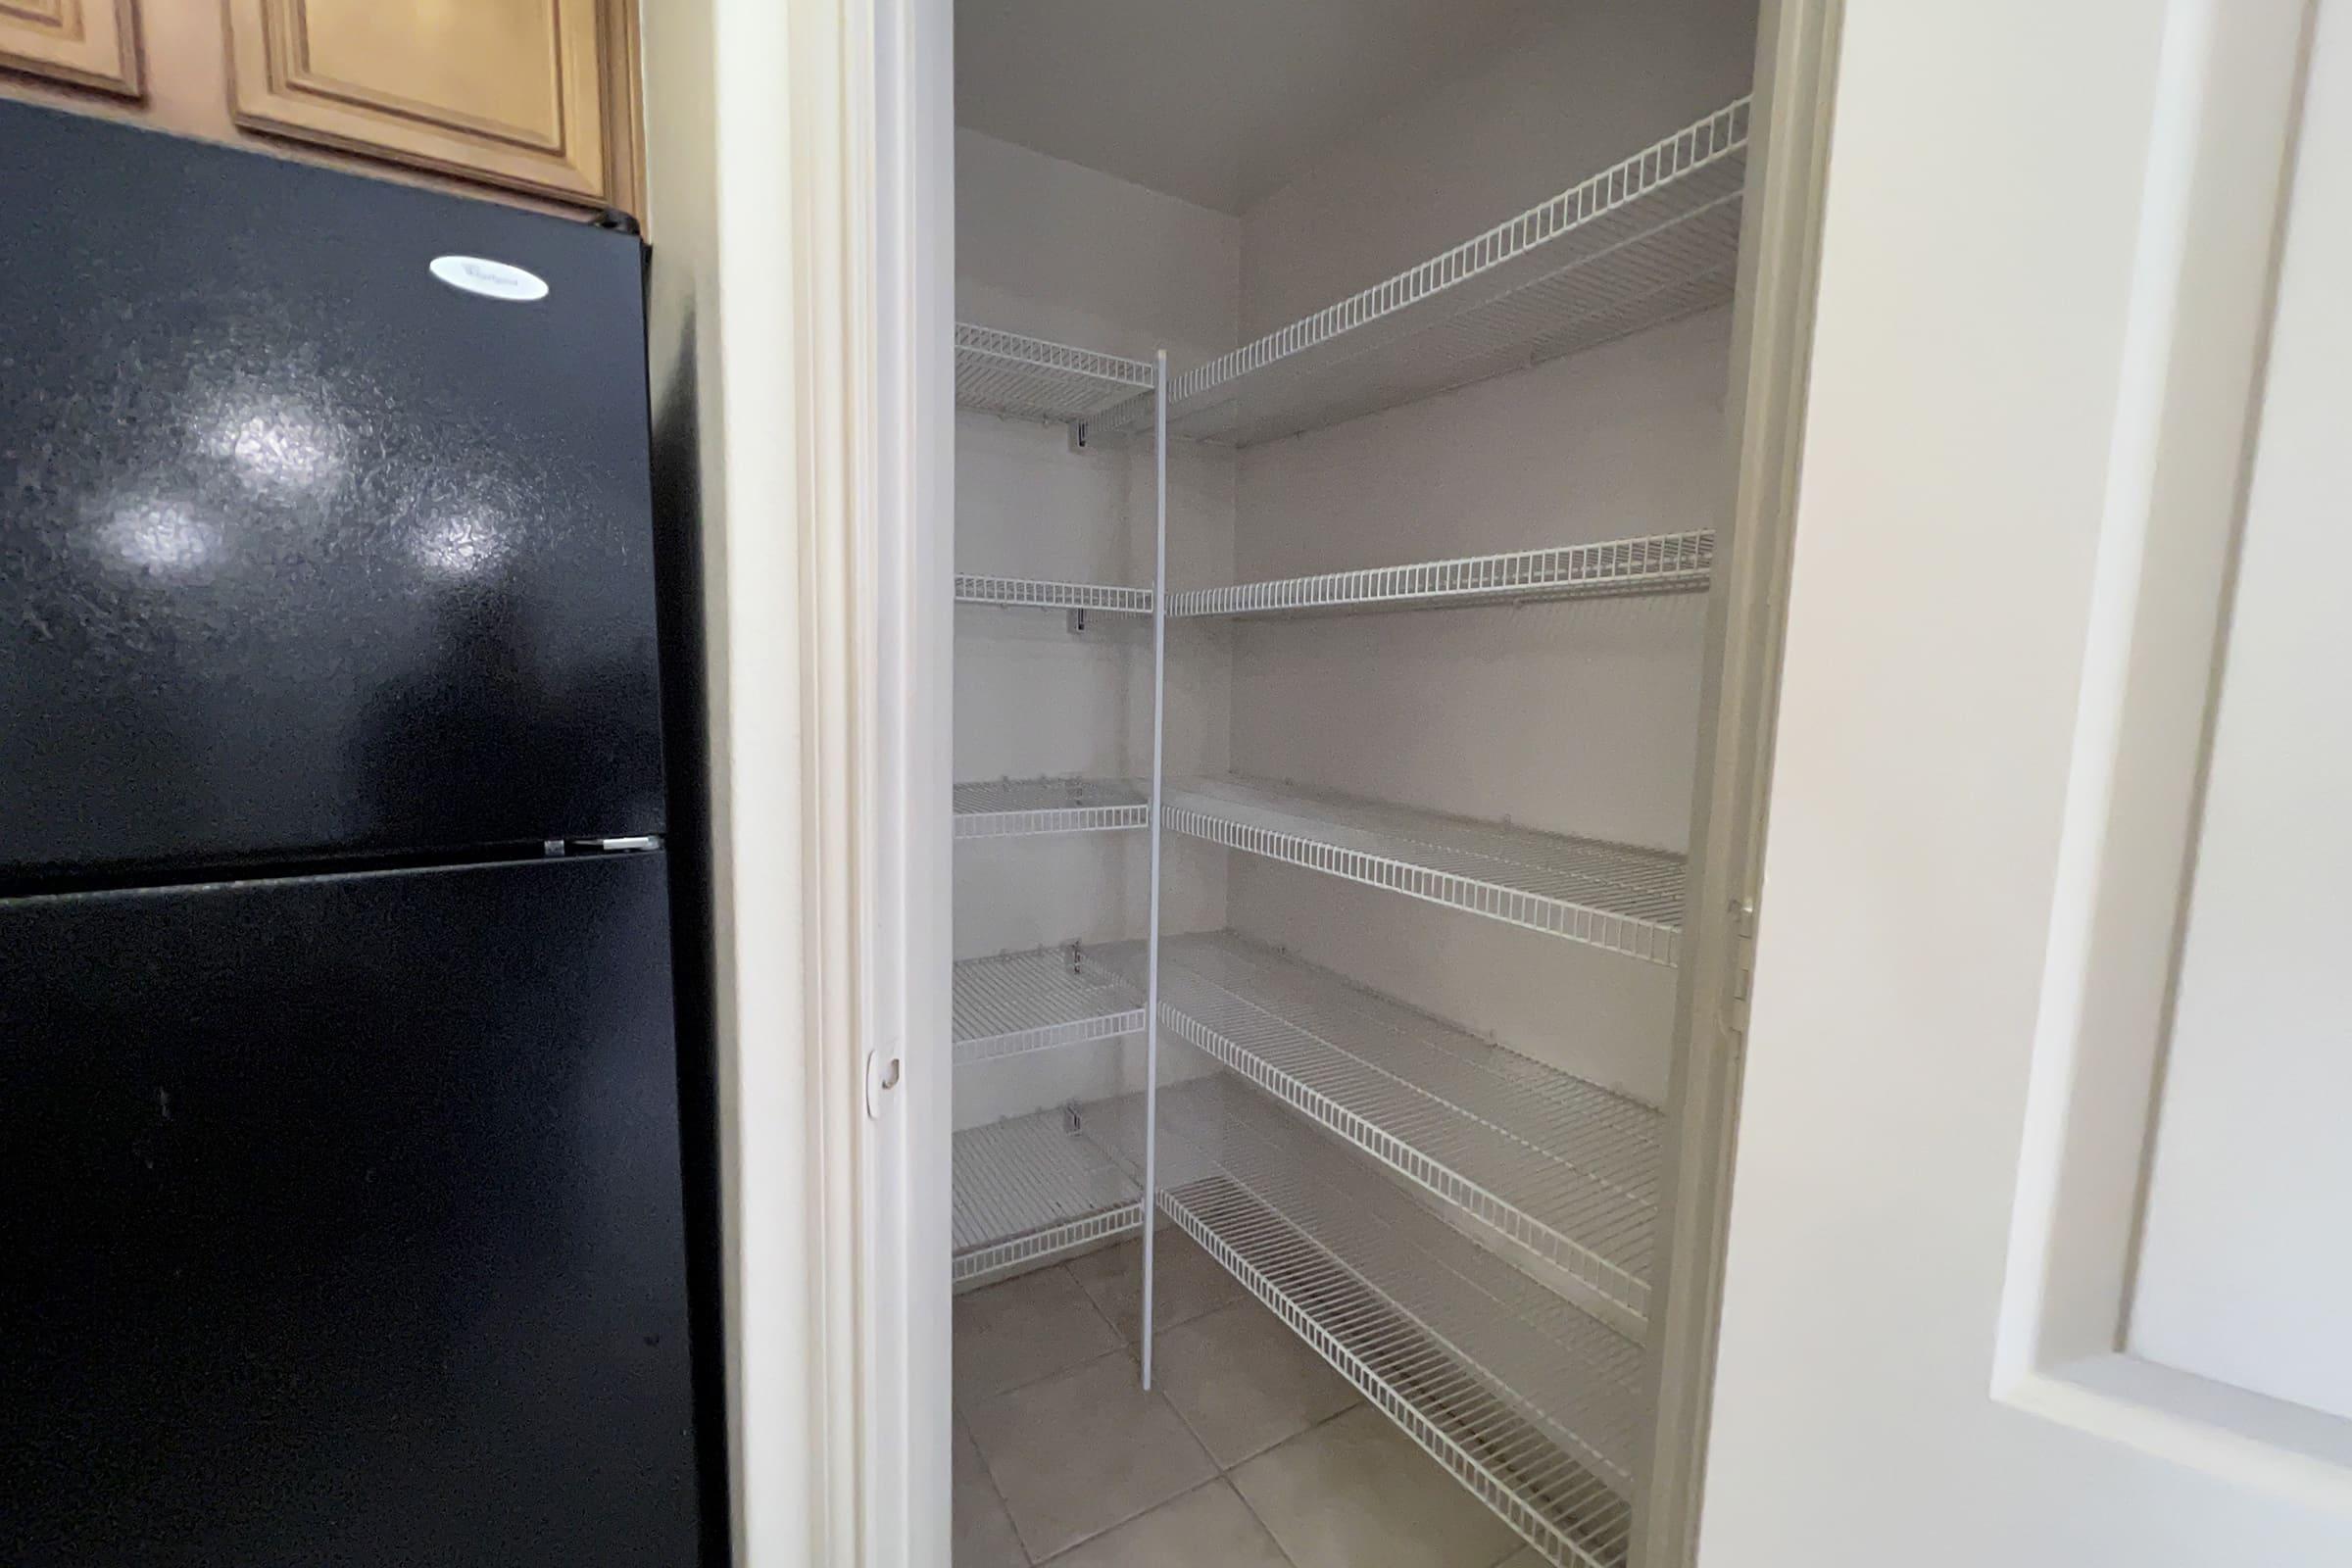 a stainless steel refrigerator in a room